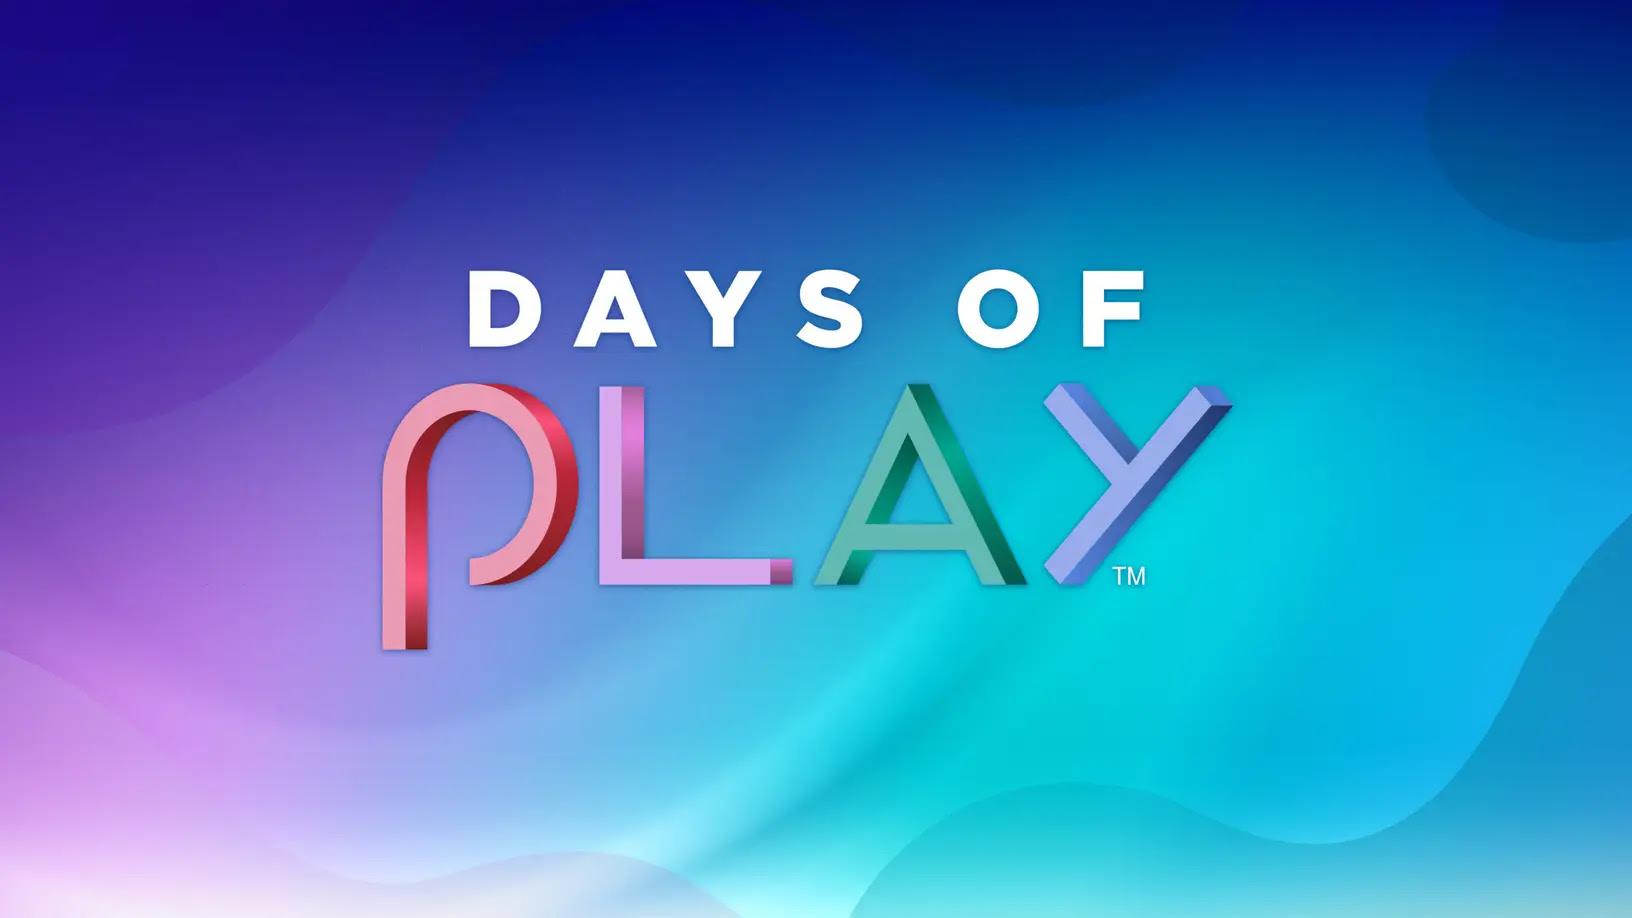 PlayStation Days of Play sale is now live - here are all the best deals